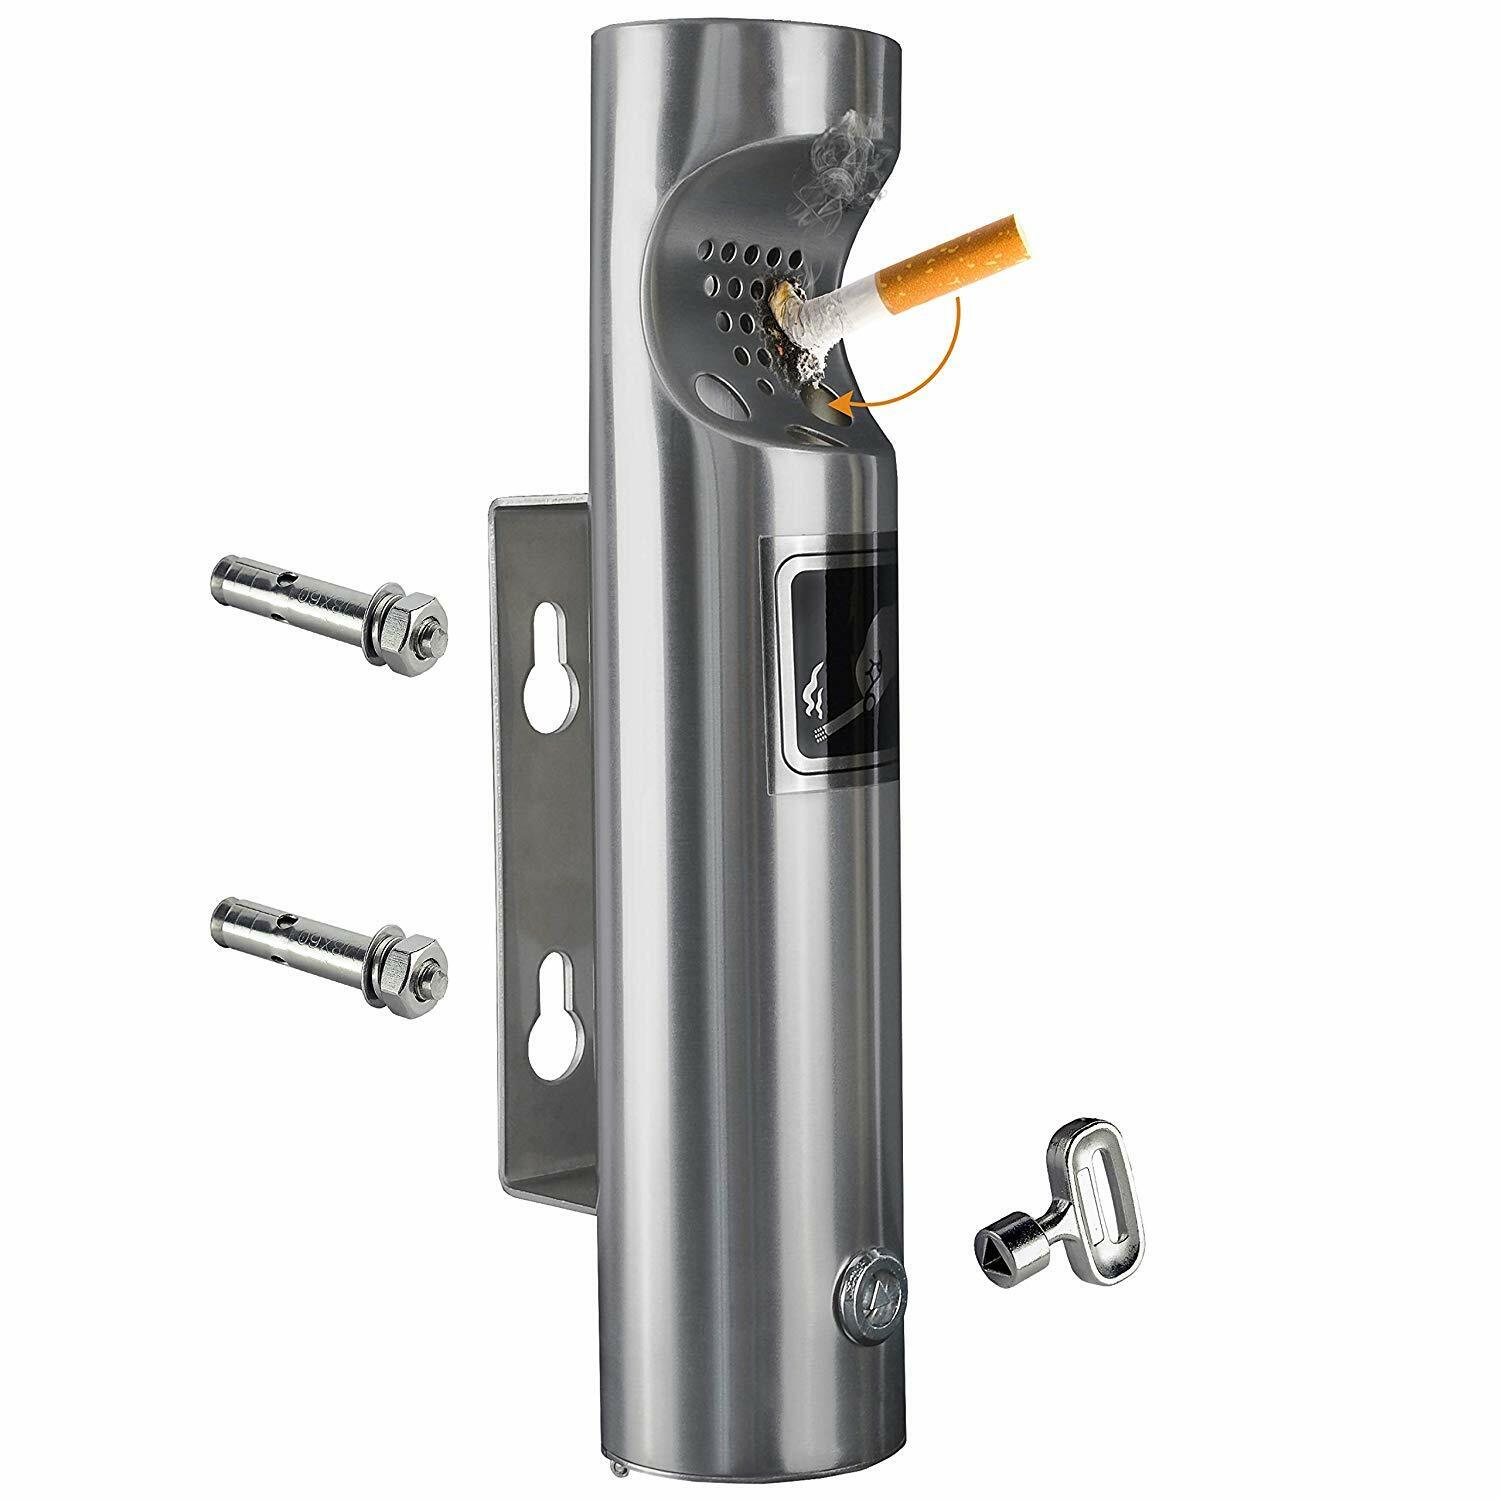 Elitra Wall Mounted Outdoor Stainless Steel Cigarette Butt Receptacle - Silver